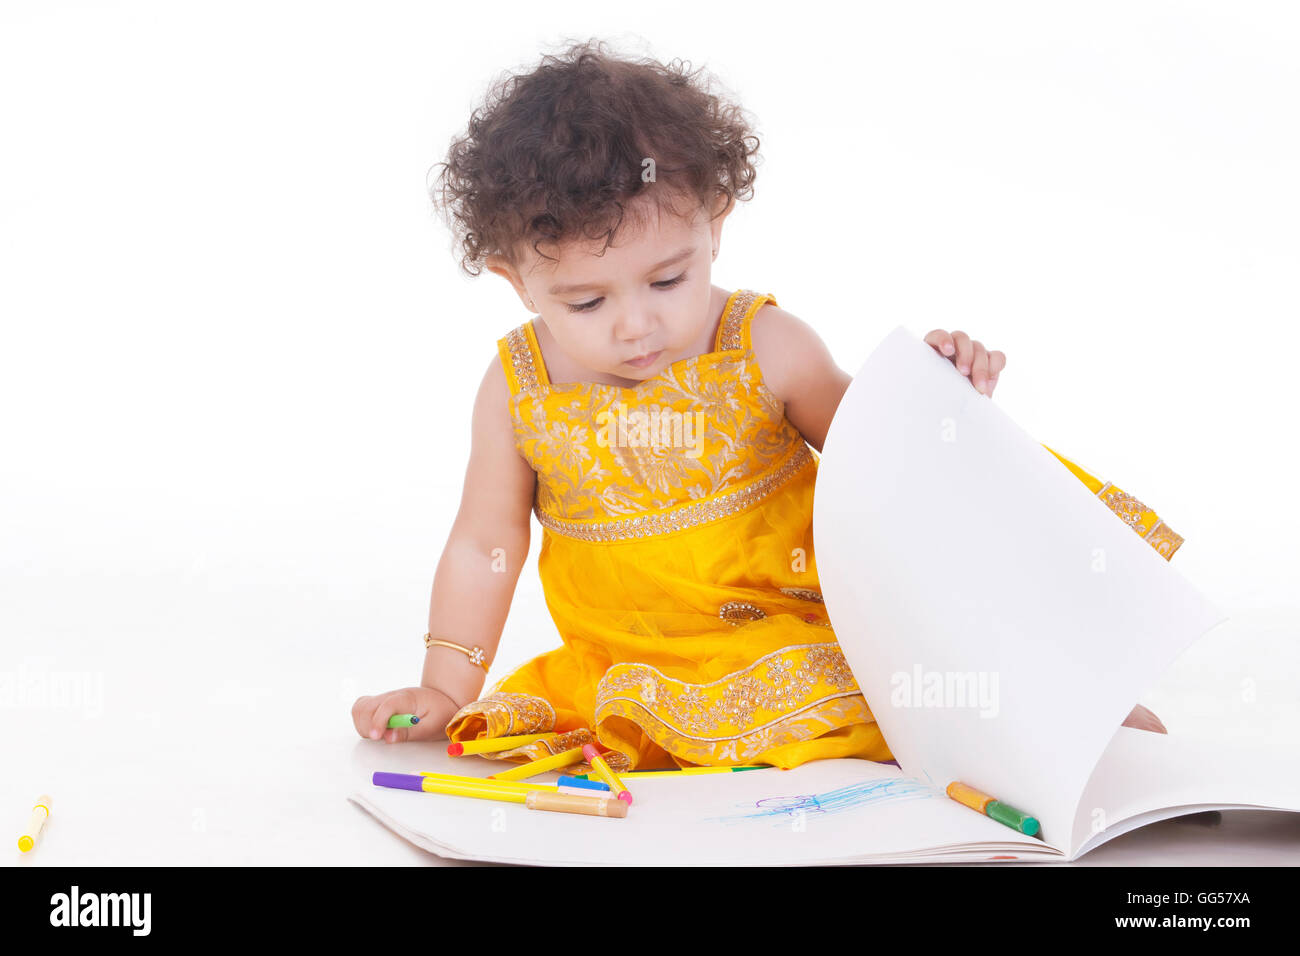 Cute girl turning page against white background Stock Photo